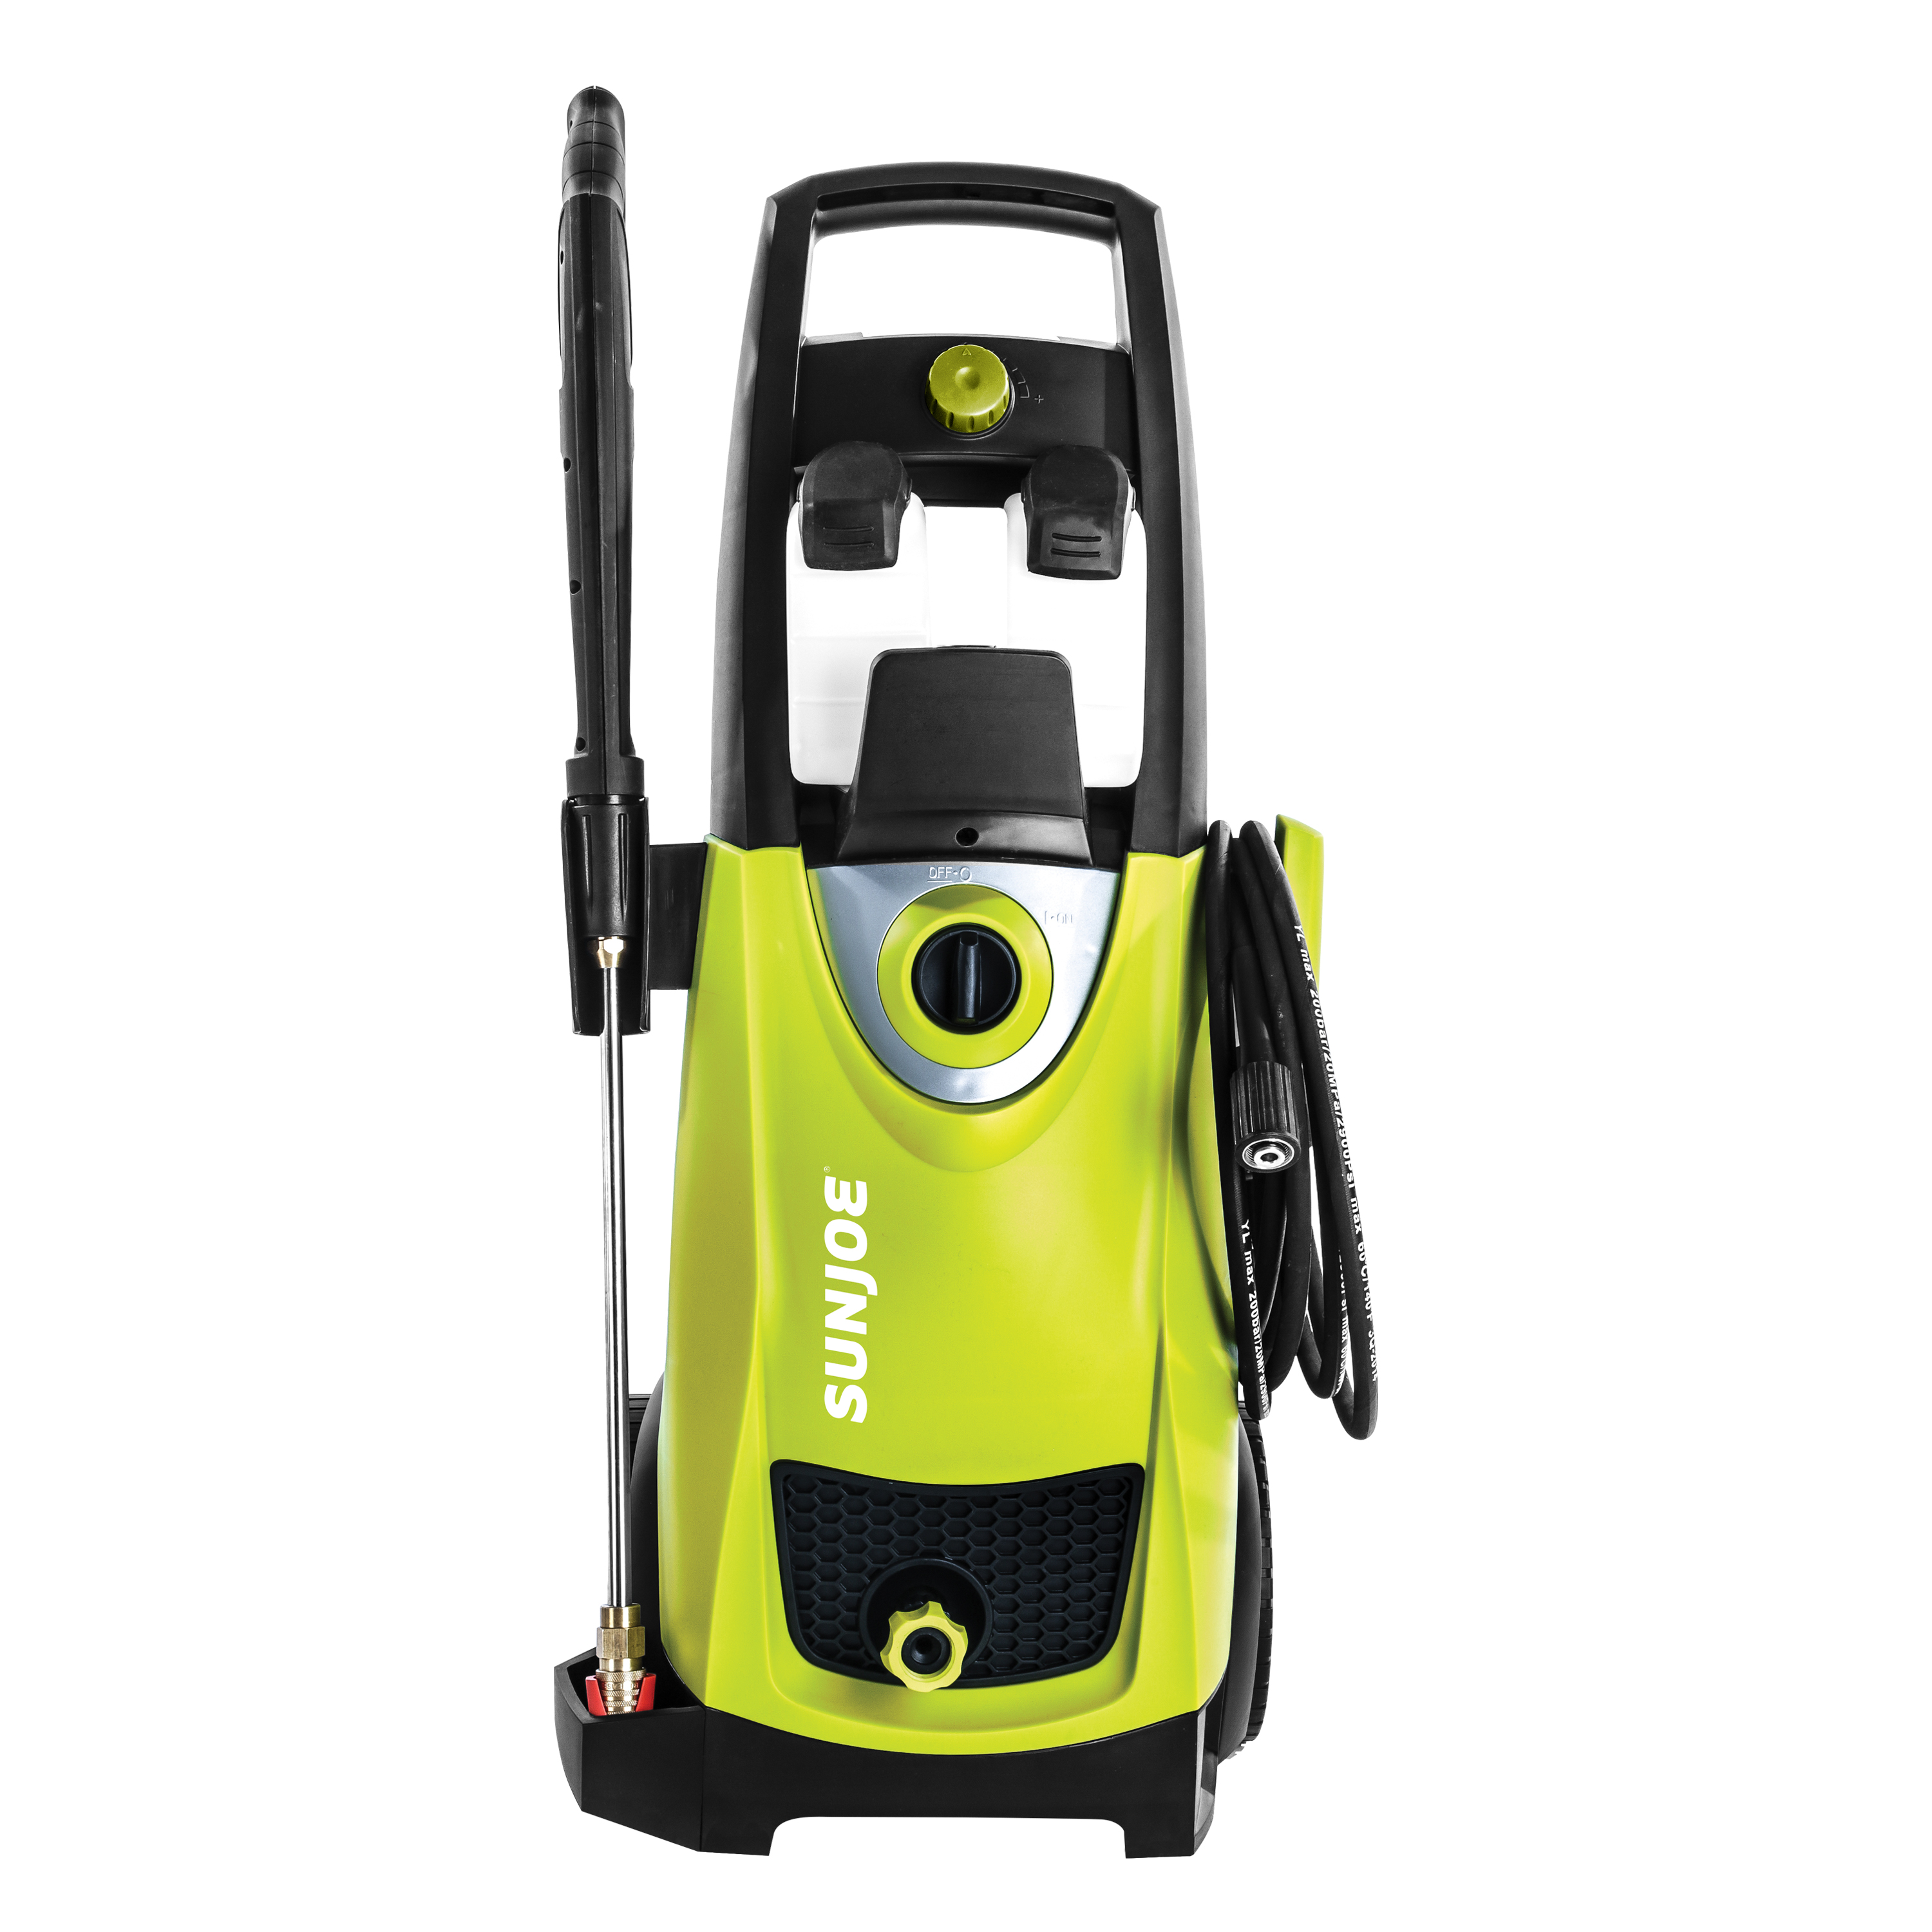 Sun Joe SPX3000 Electric Pressure Washer, 14.5-Amp, Quick-Connect Tips - image 5 of 25